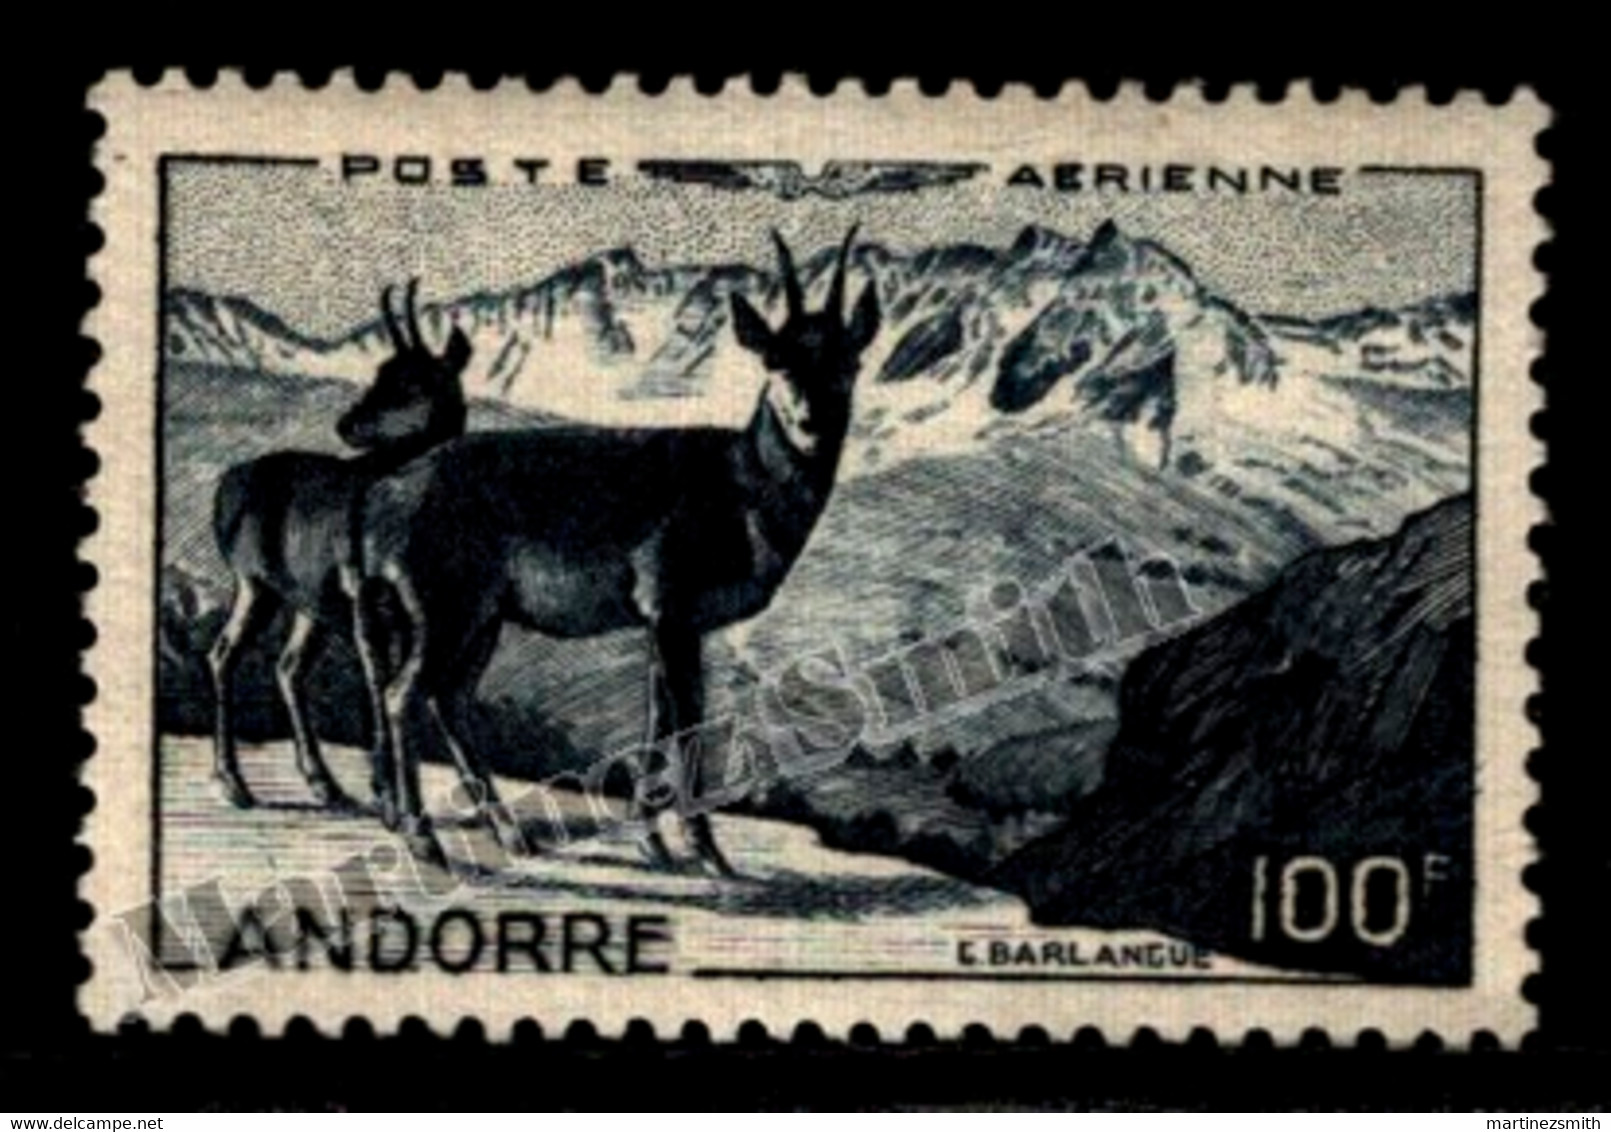 Andorre Français / French Andorra 1950 Airmail Yv. 1, Nature Landscape, Fauna, Isards - MNH - Luchtpost